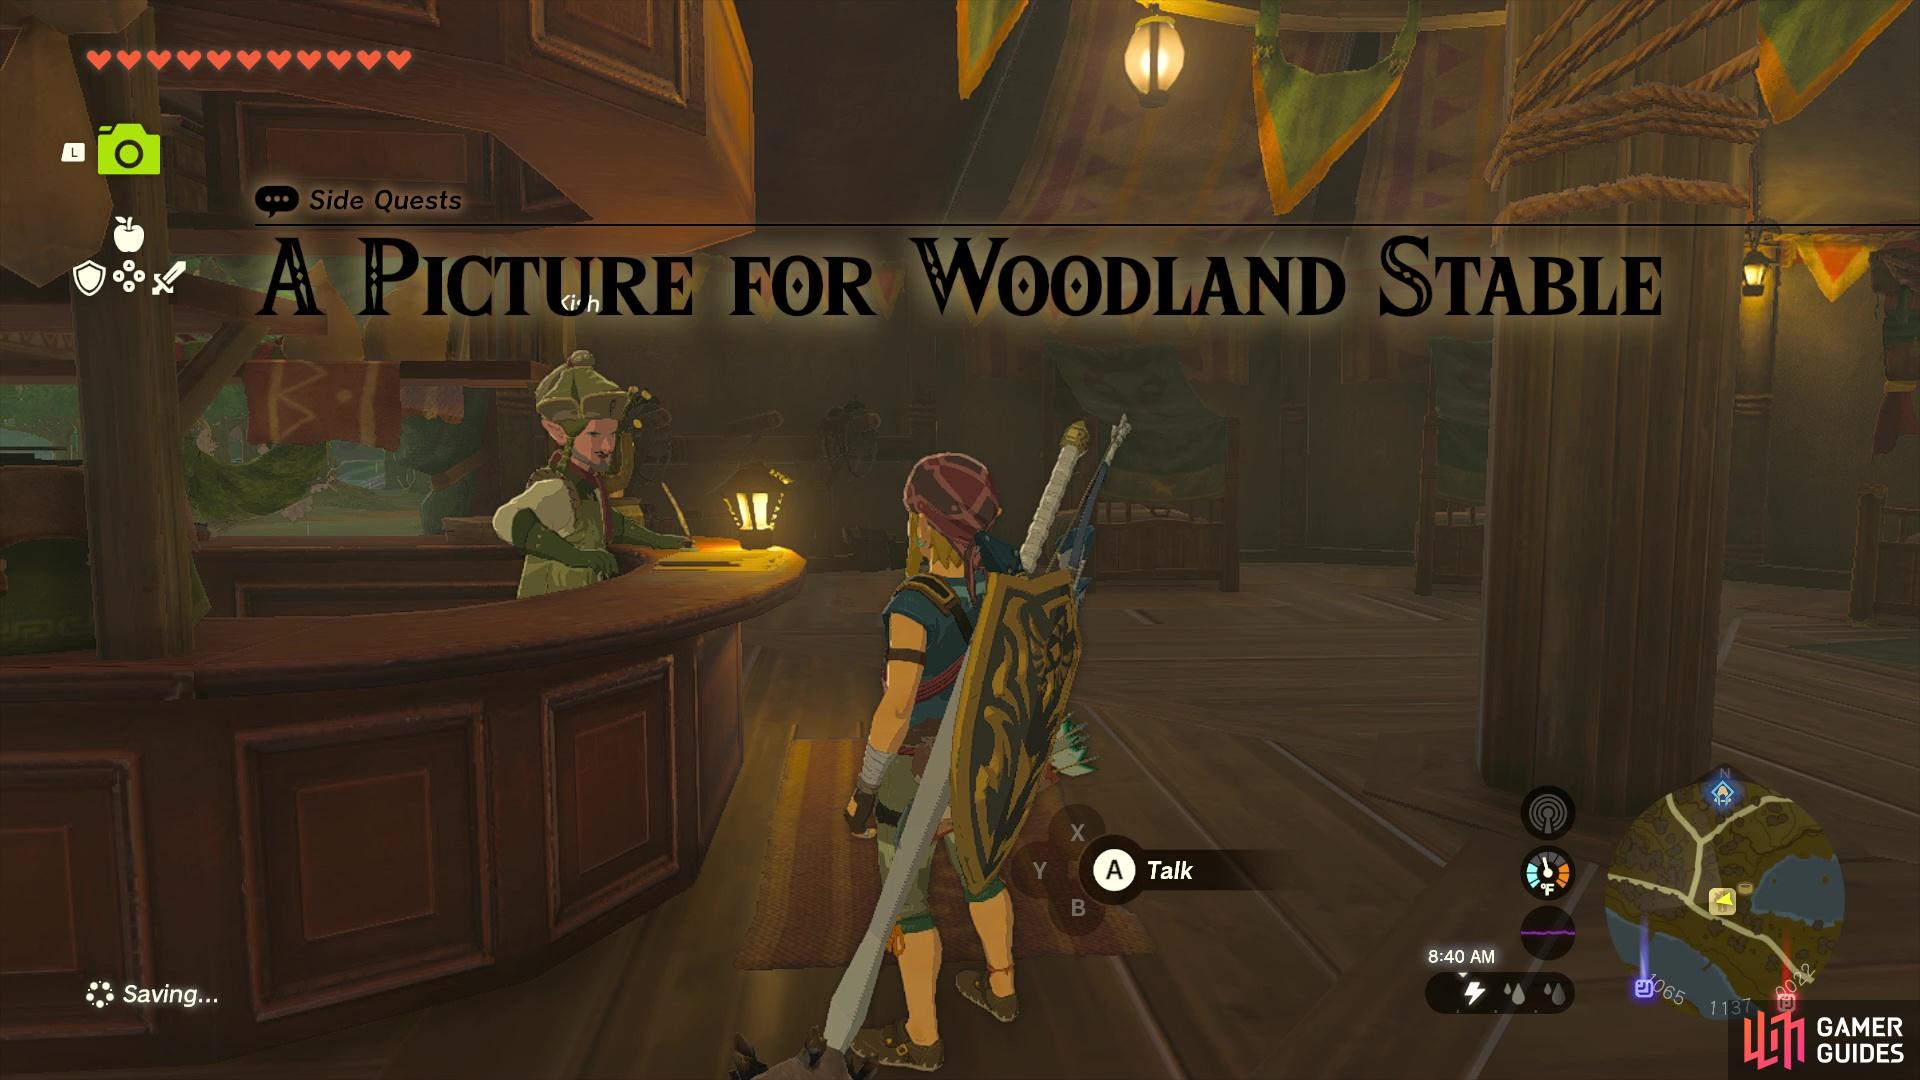 Inspect the picture frame at the Woodland Stable for this quest.